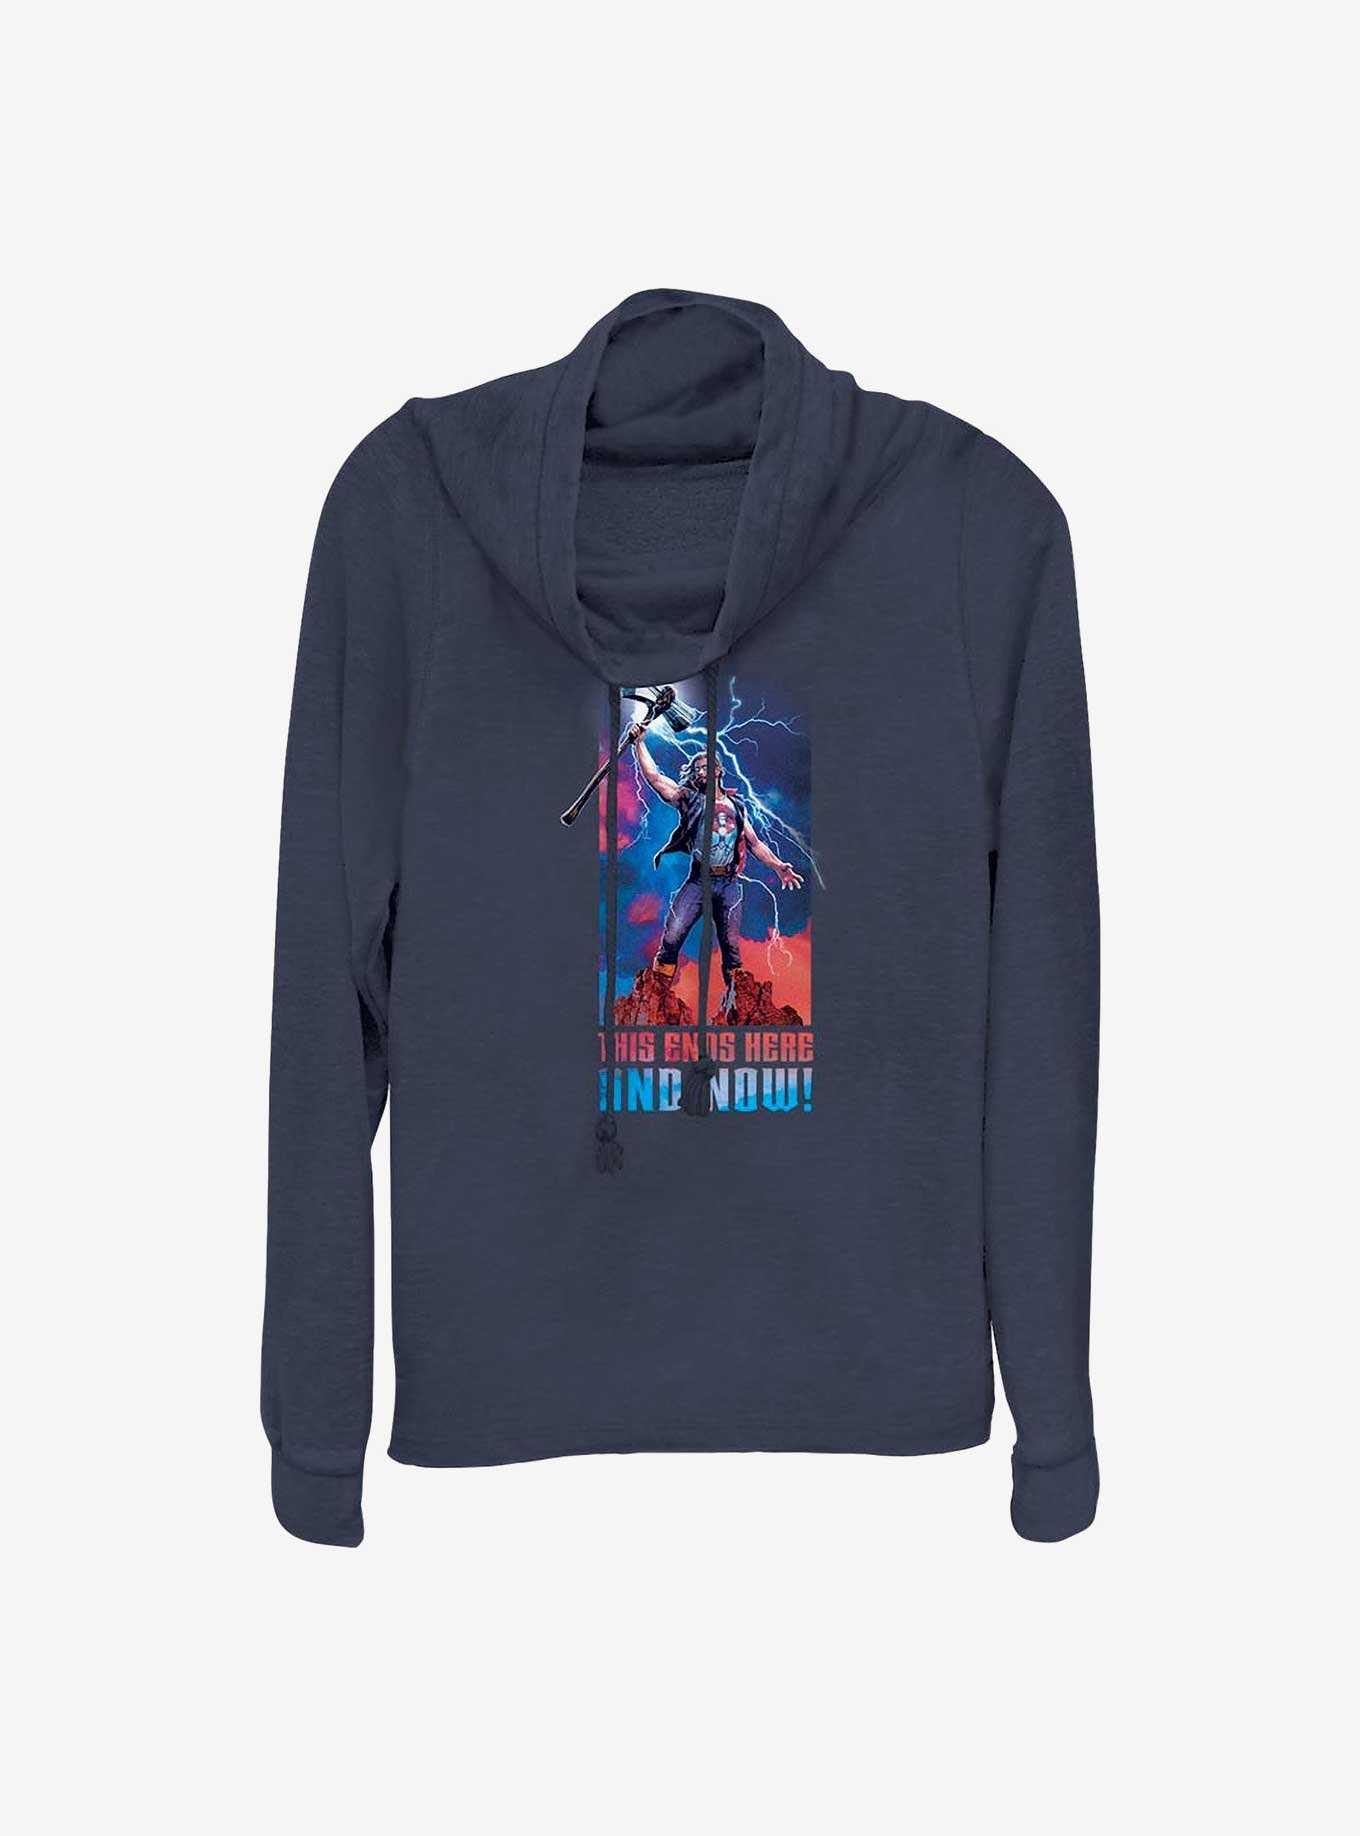 Marvel Thor: Love and Thunder Ends Here and Now Cowl Neck Long-Sleeve Top, , hi-res